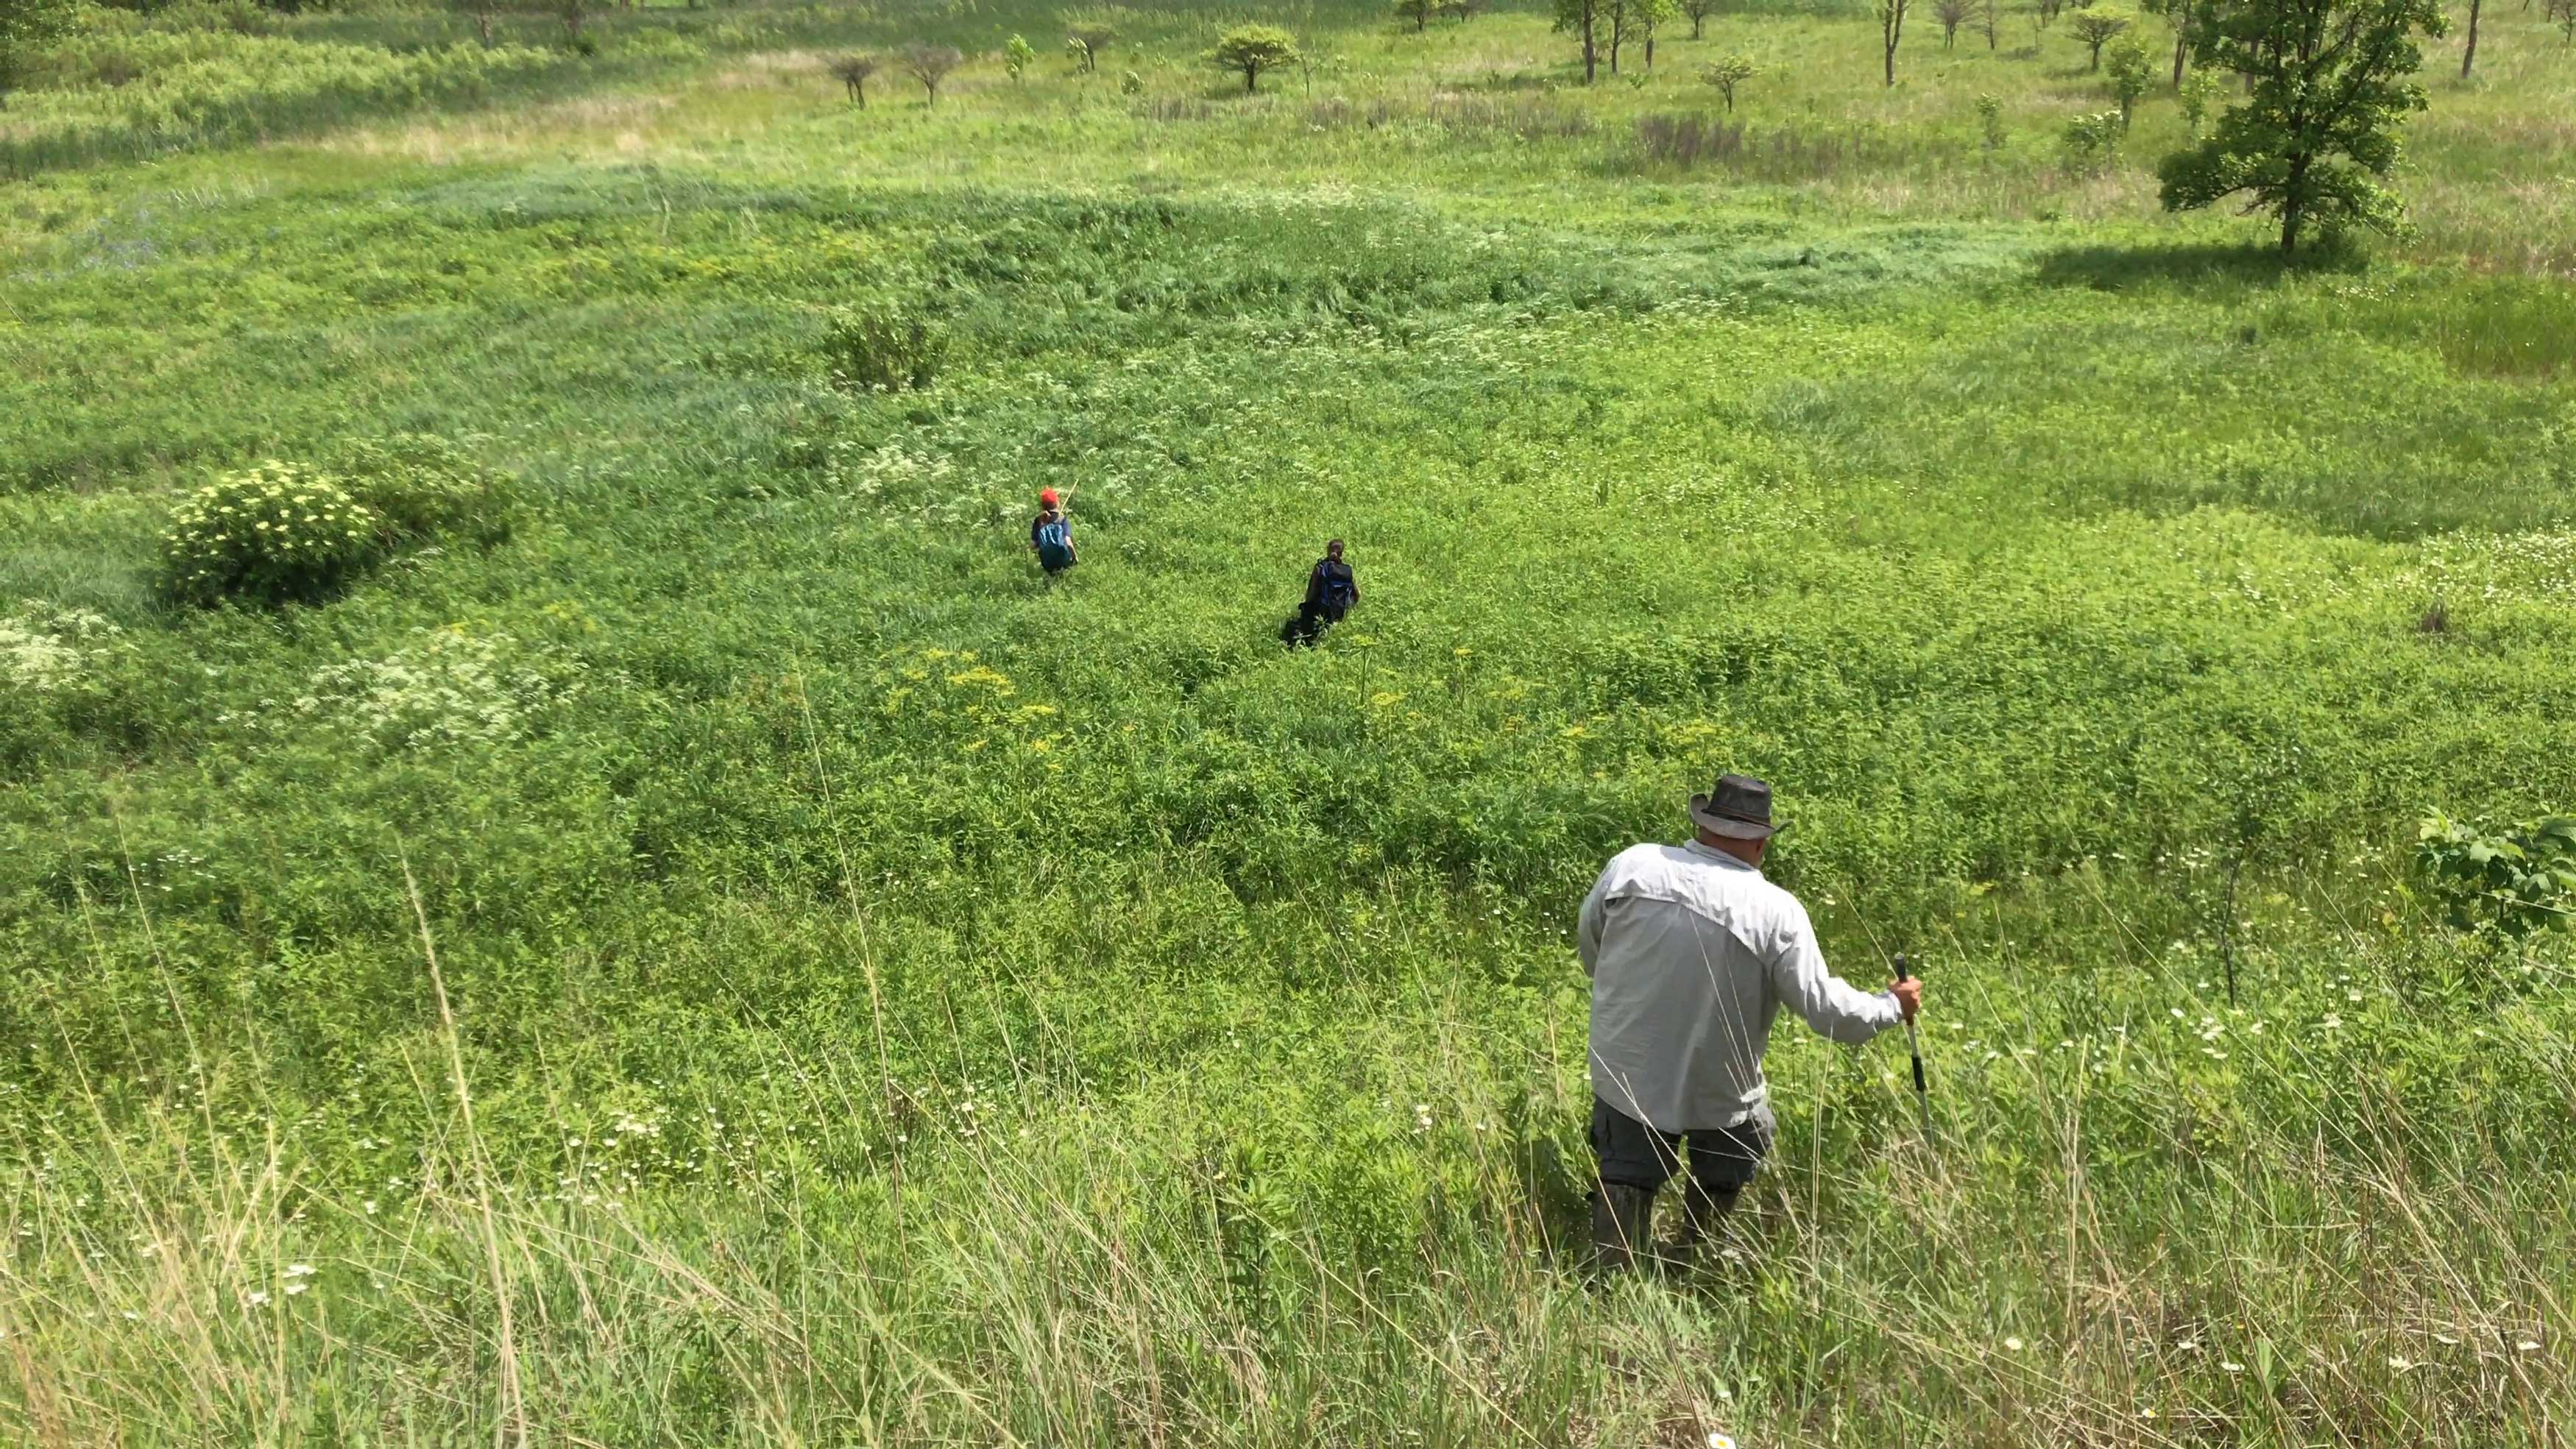 A group of people looking for Kirtland's snakes in a field.